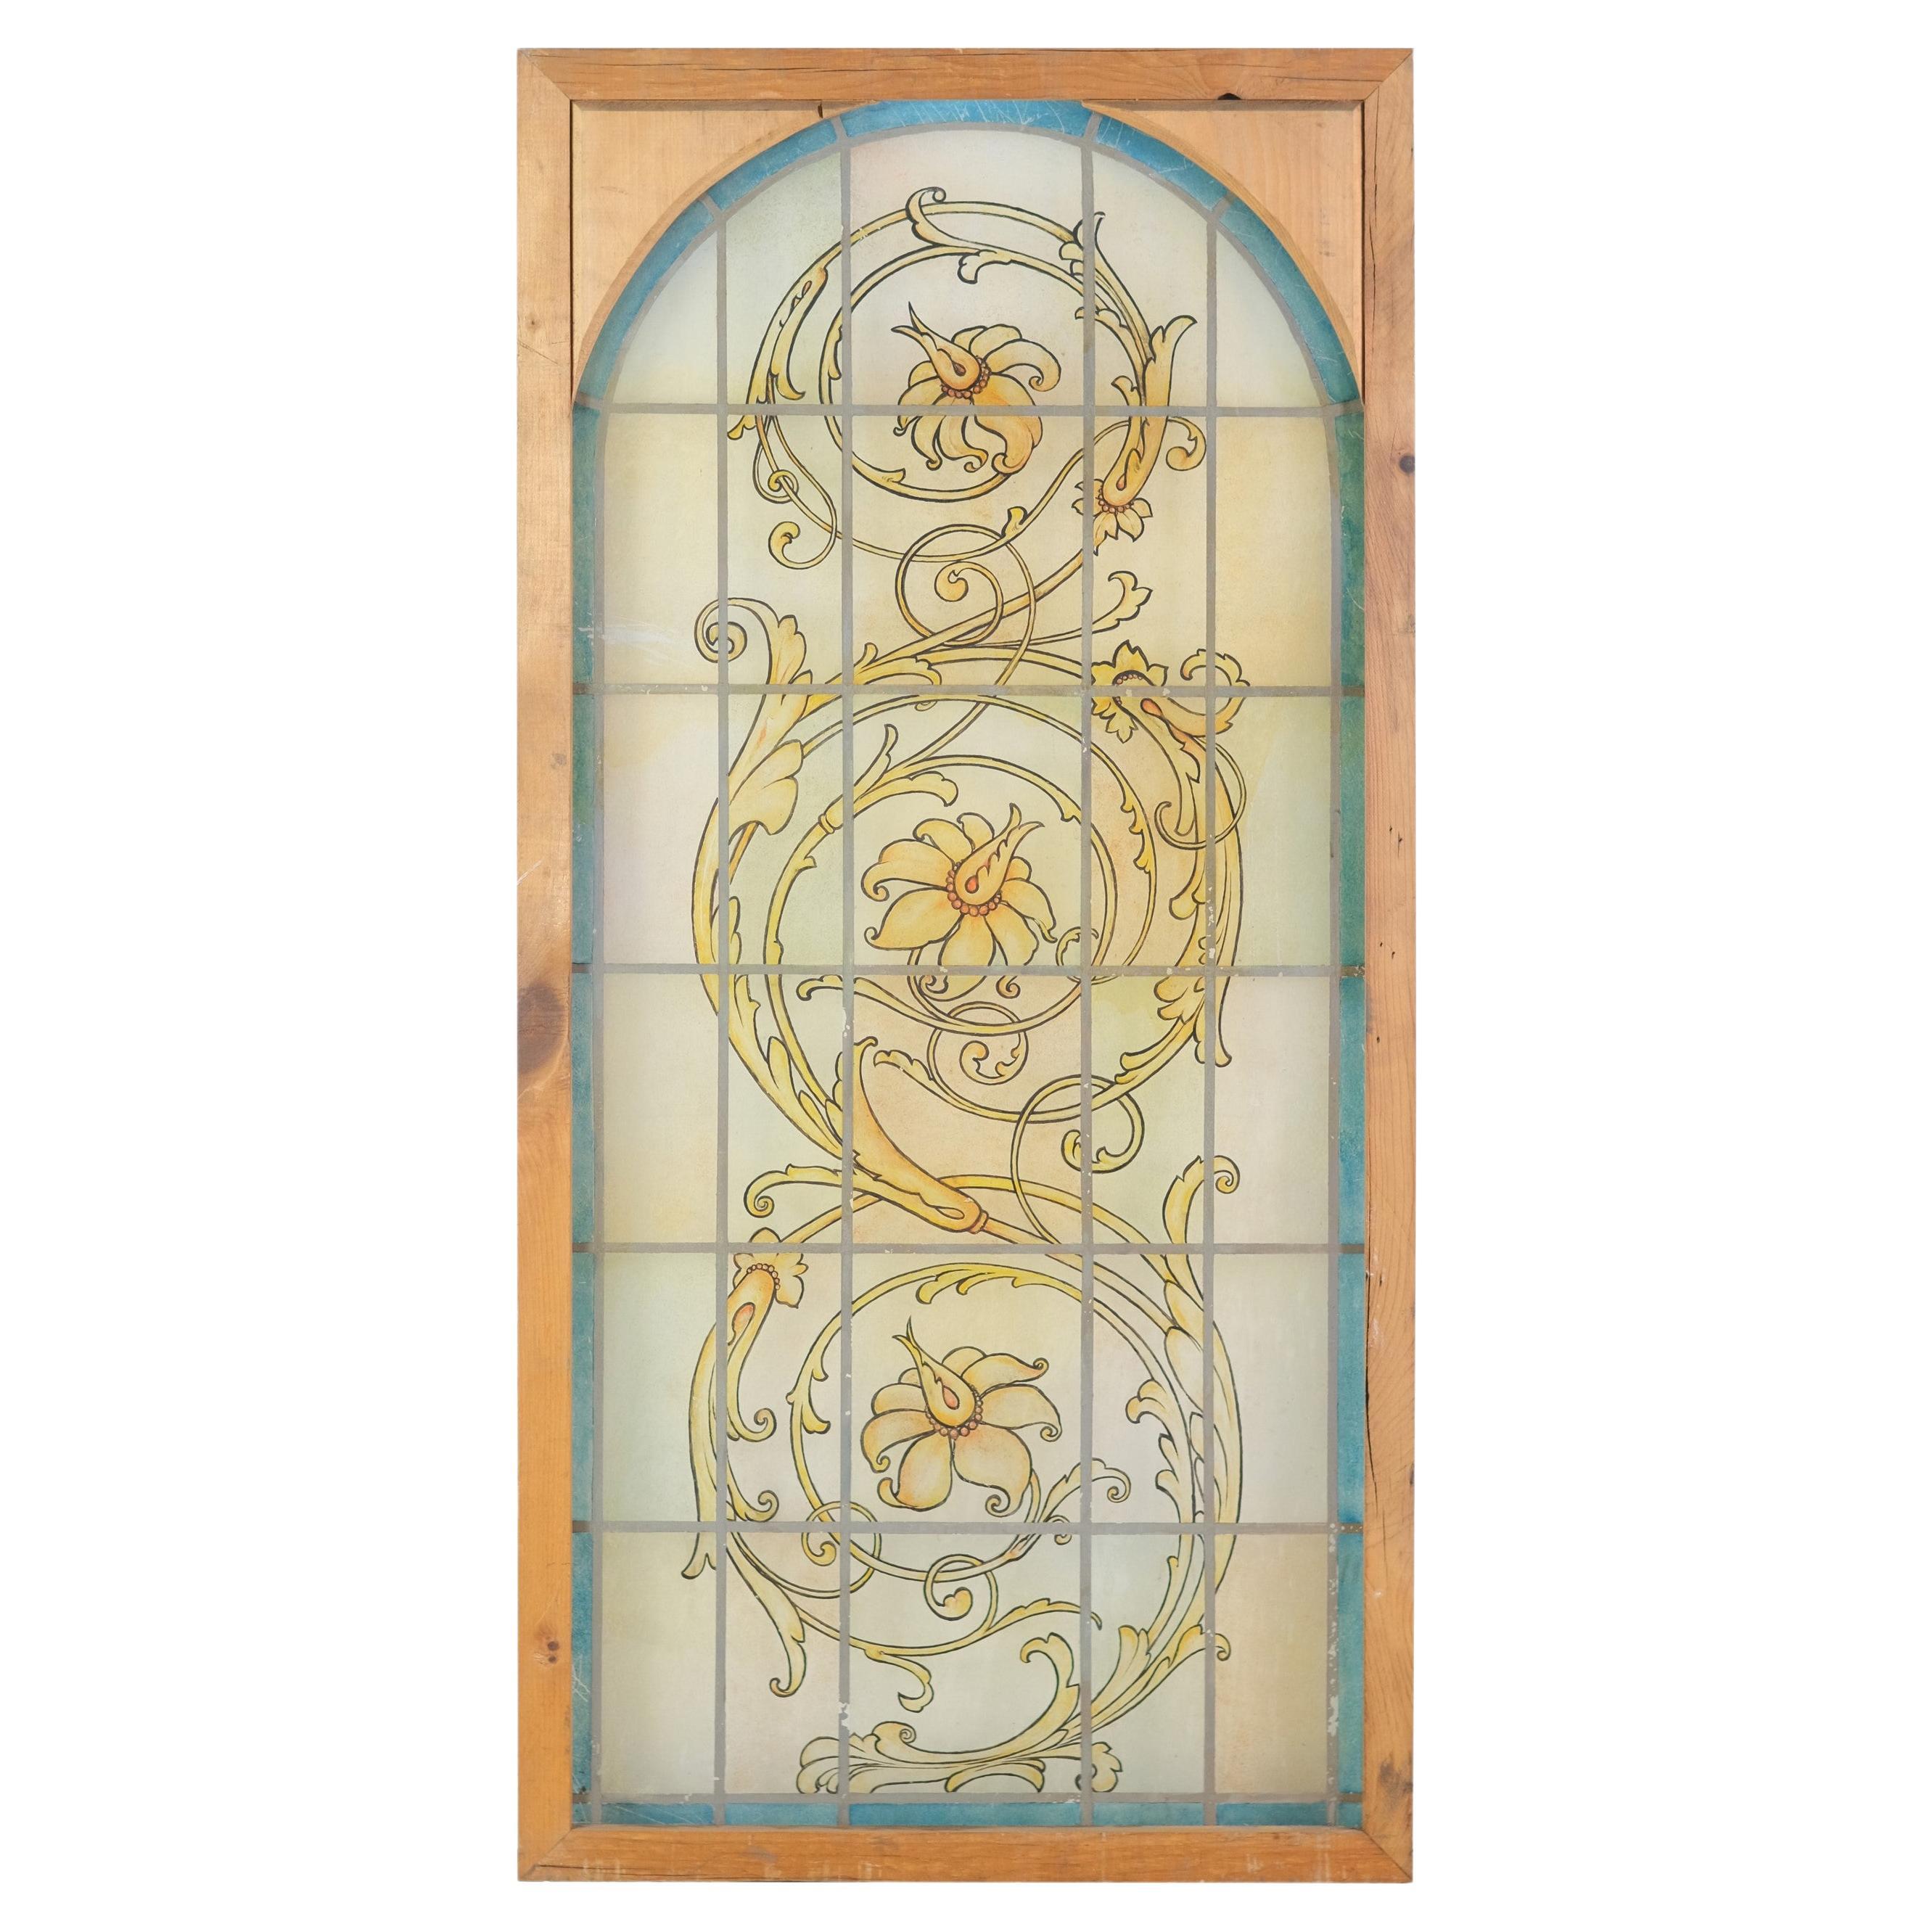 20th C Roman Arched Faux Painted Stained Glass Window